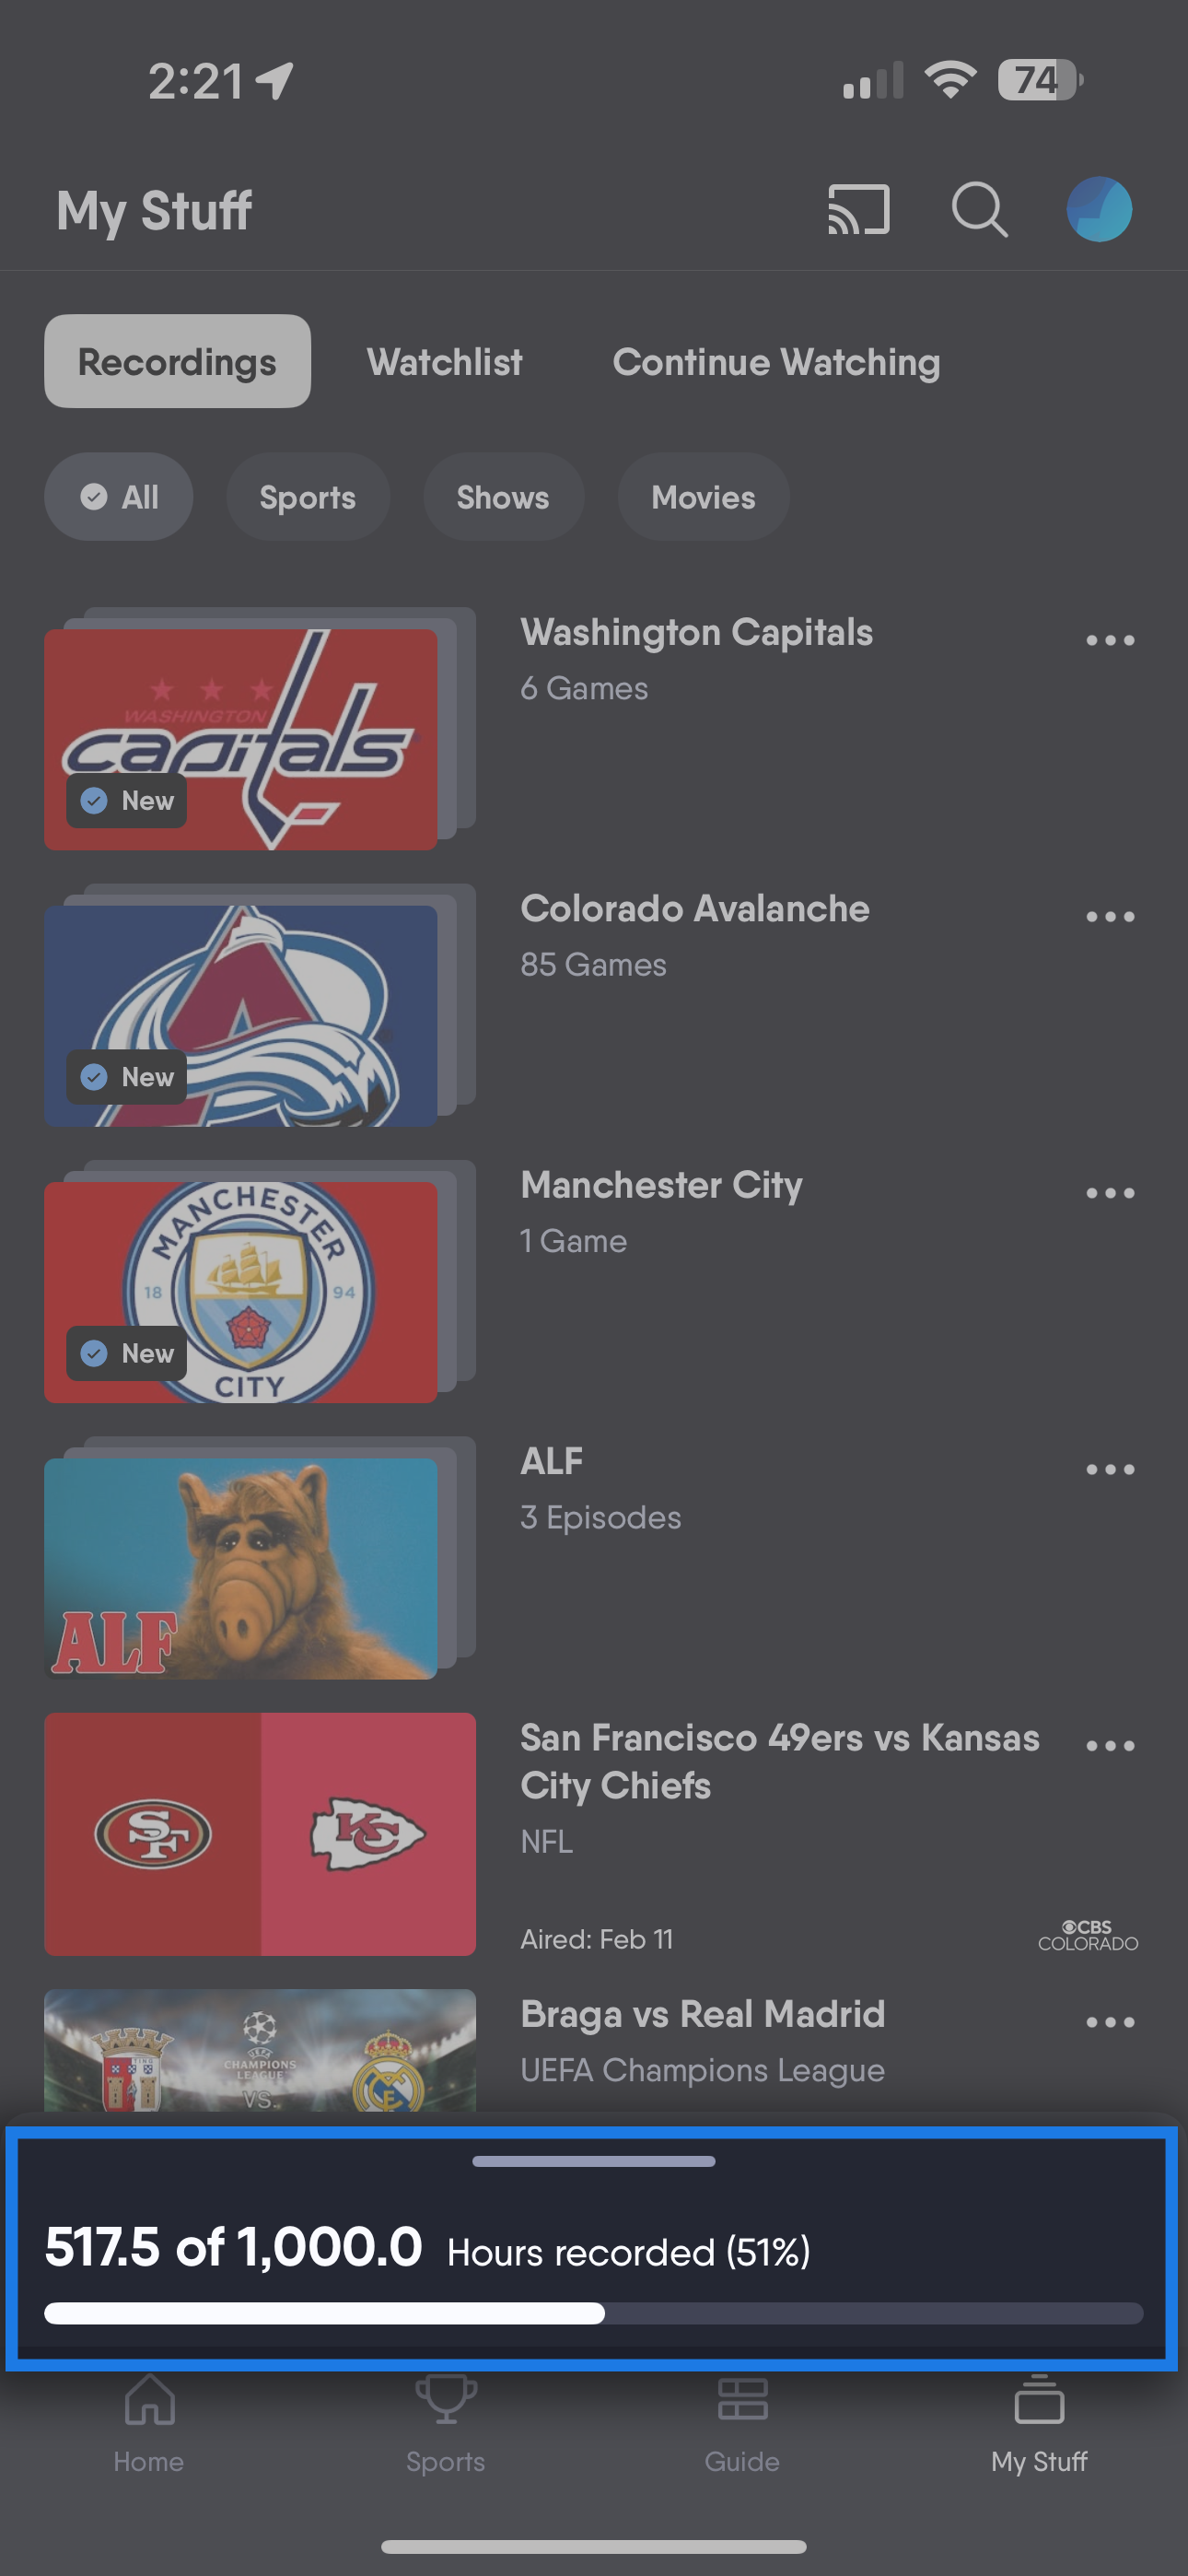 SCHEDULED screen of the FuboTV app on iOS with upcoming recordings shown